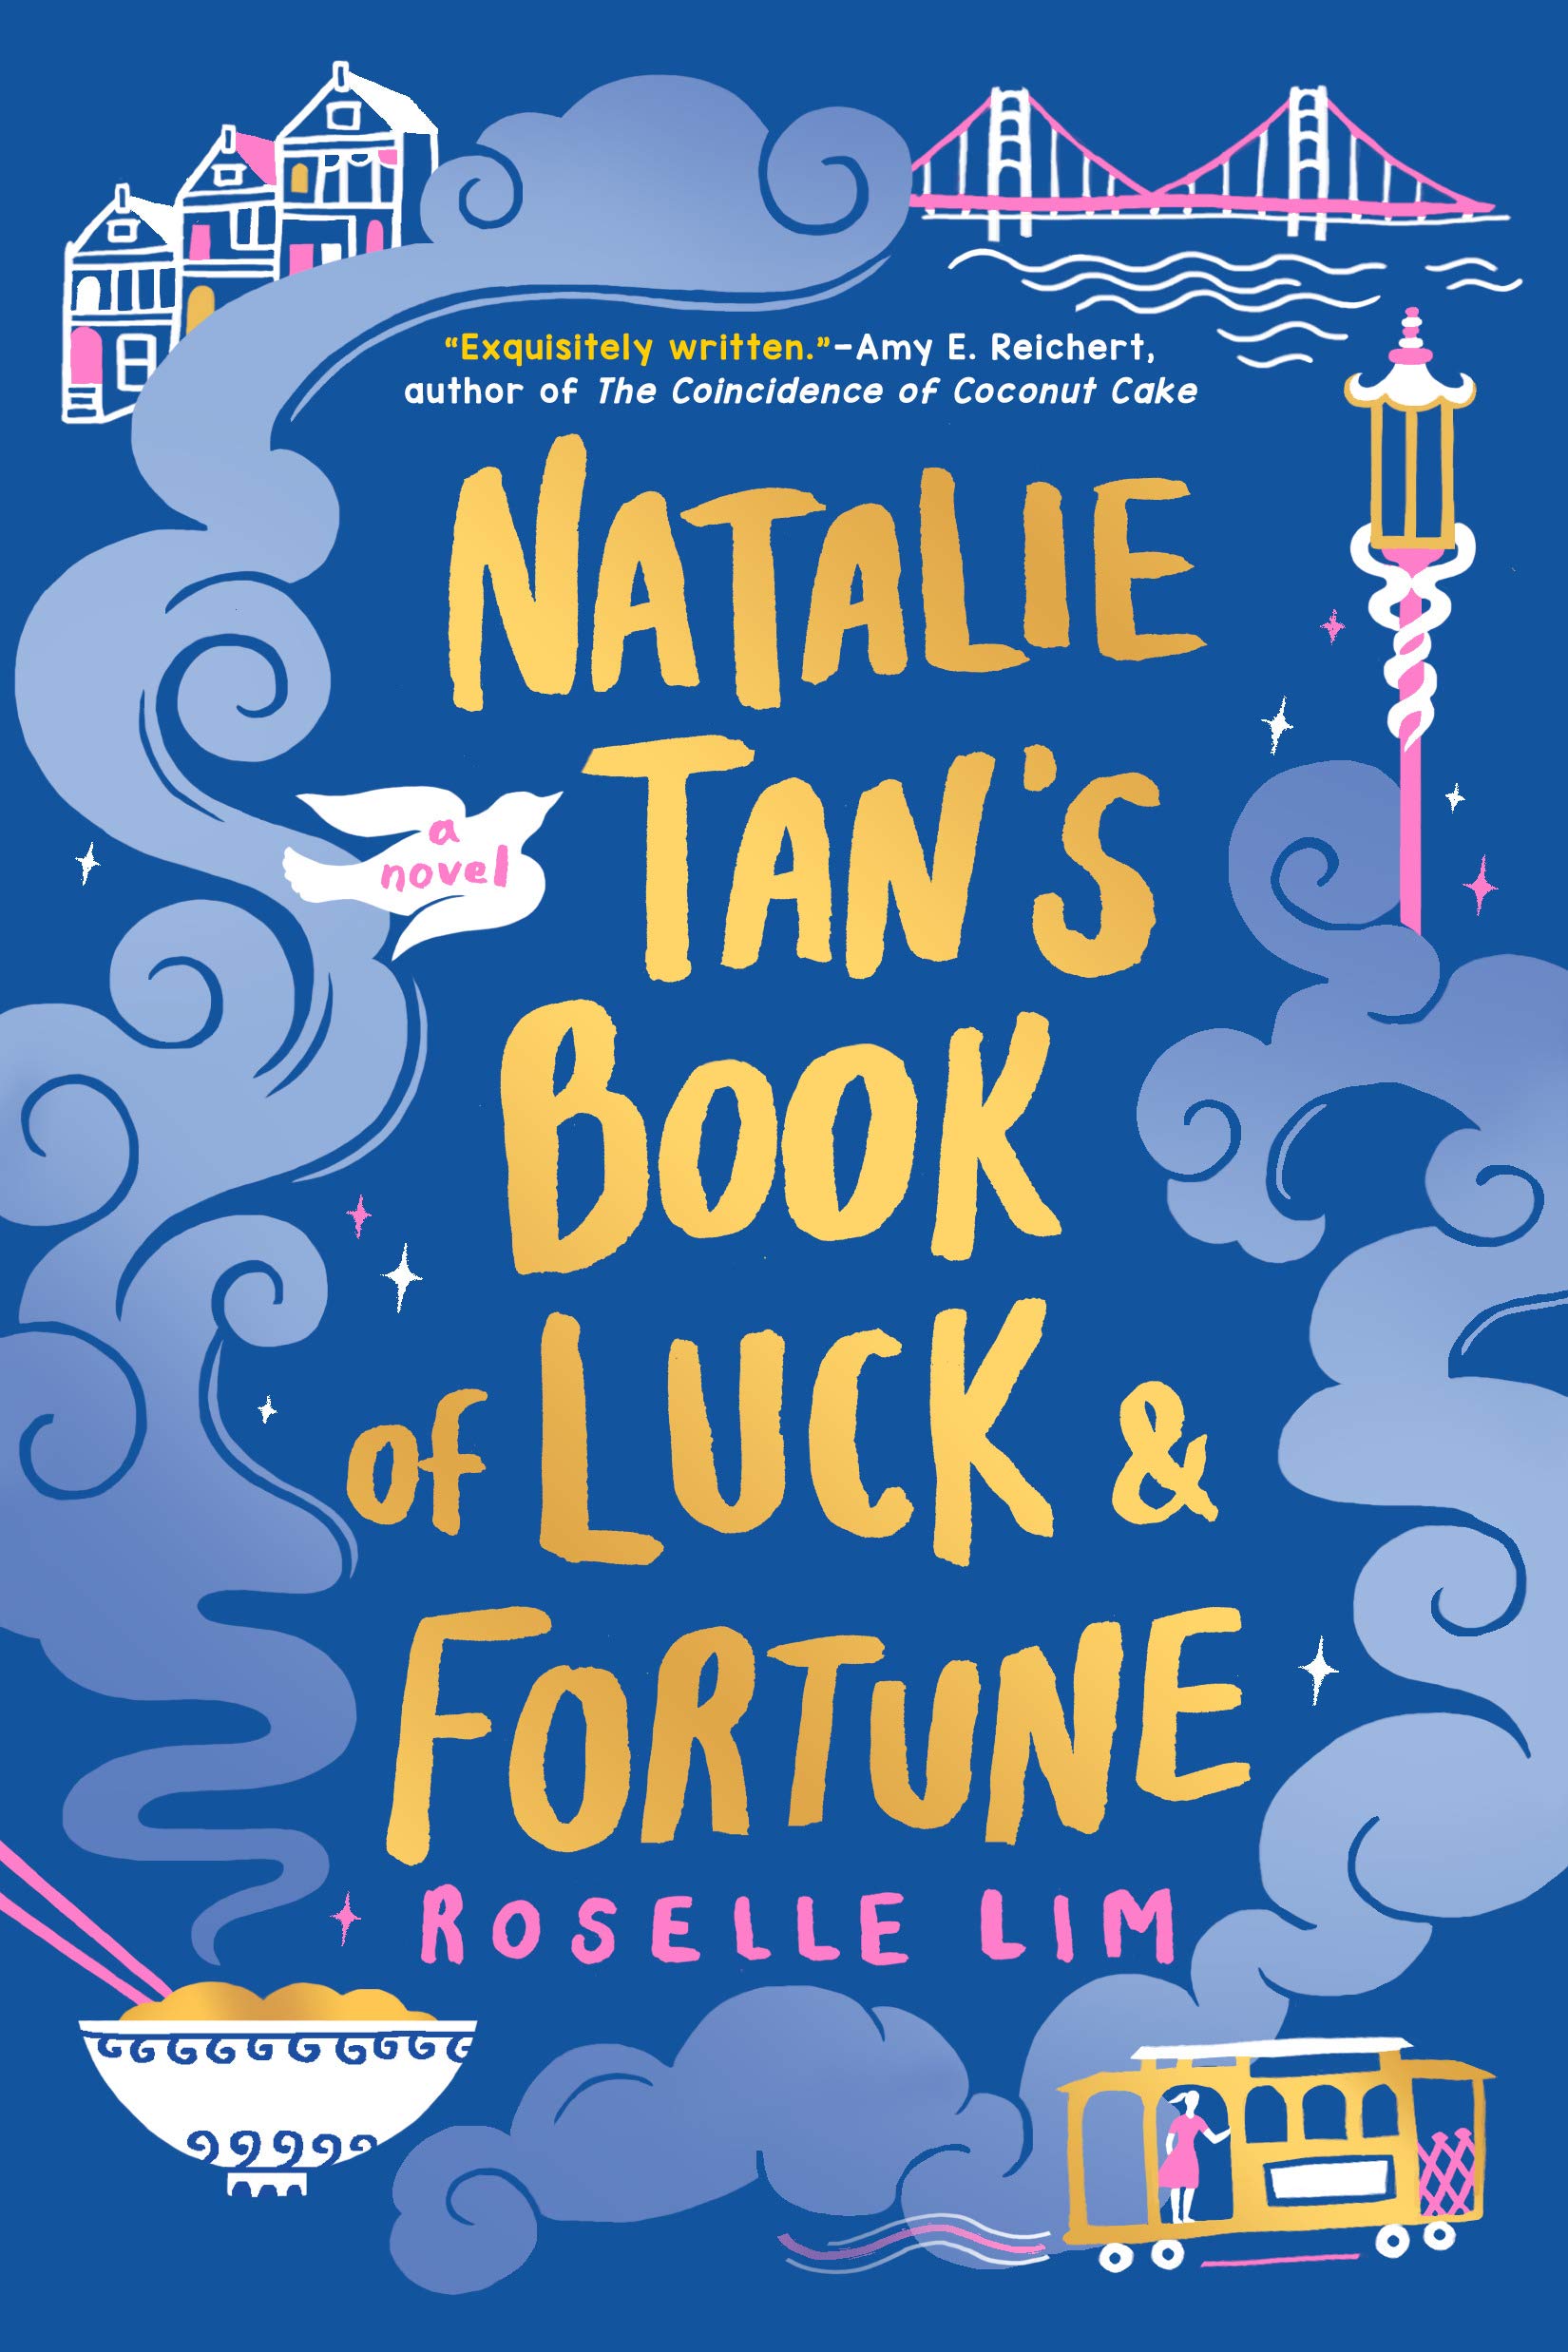 Book Review: “Natalie Tan’s Book of Luck and Fortune” by Roselle Lim